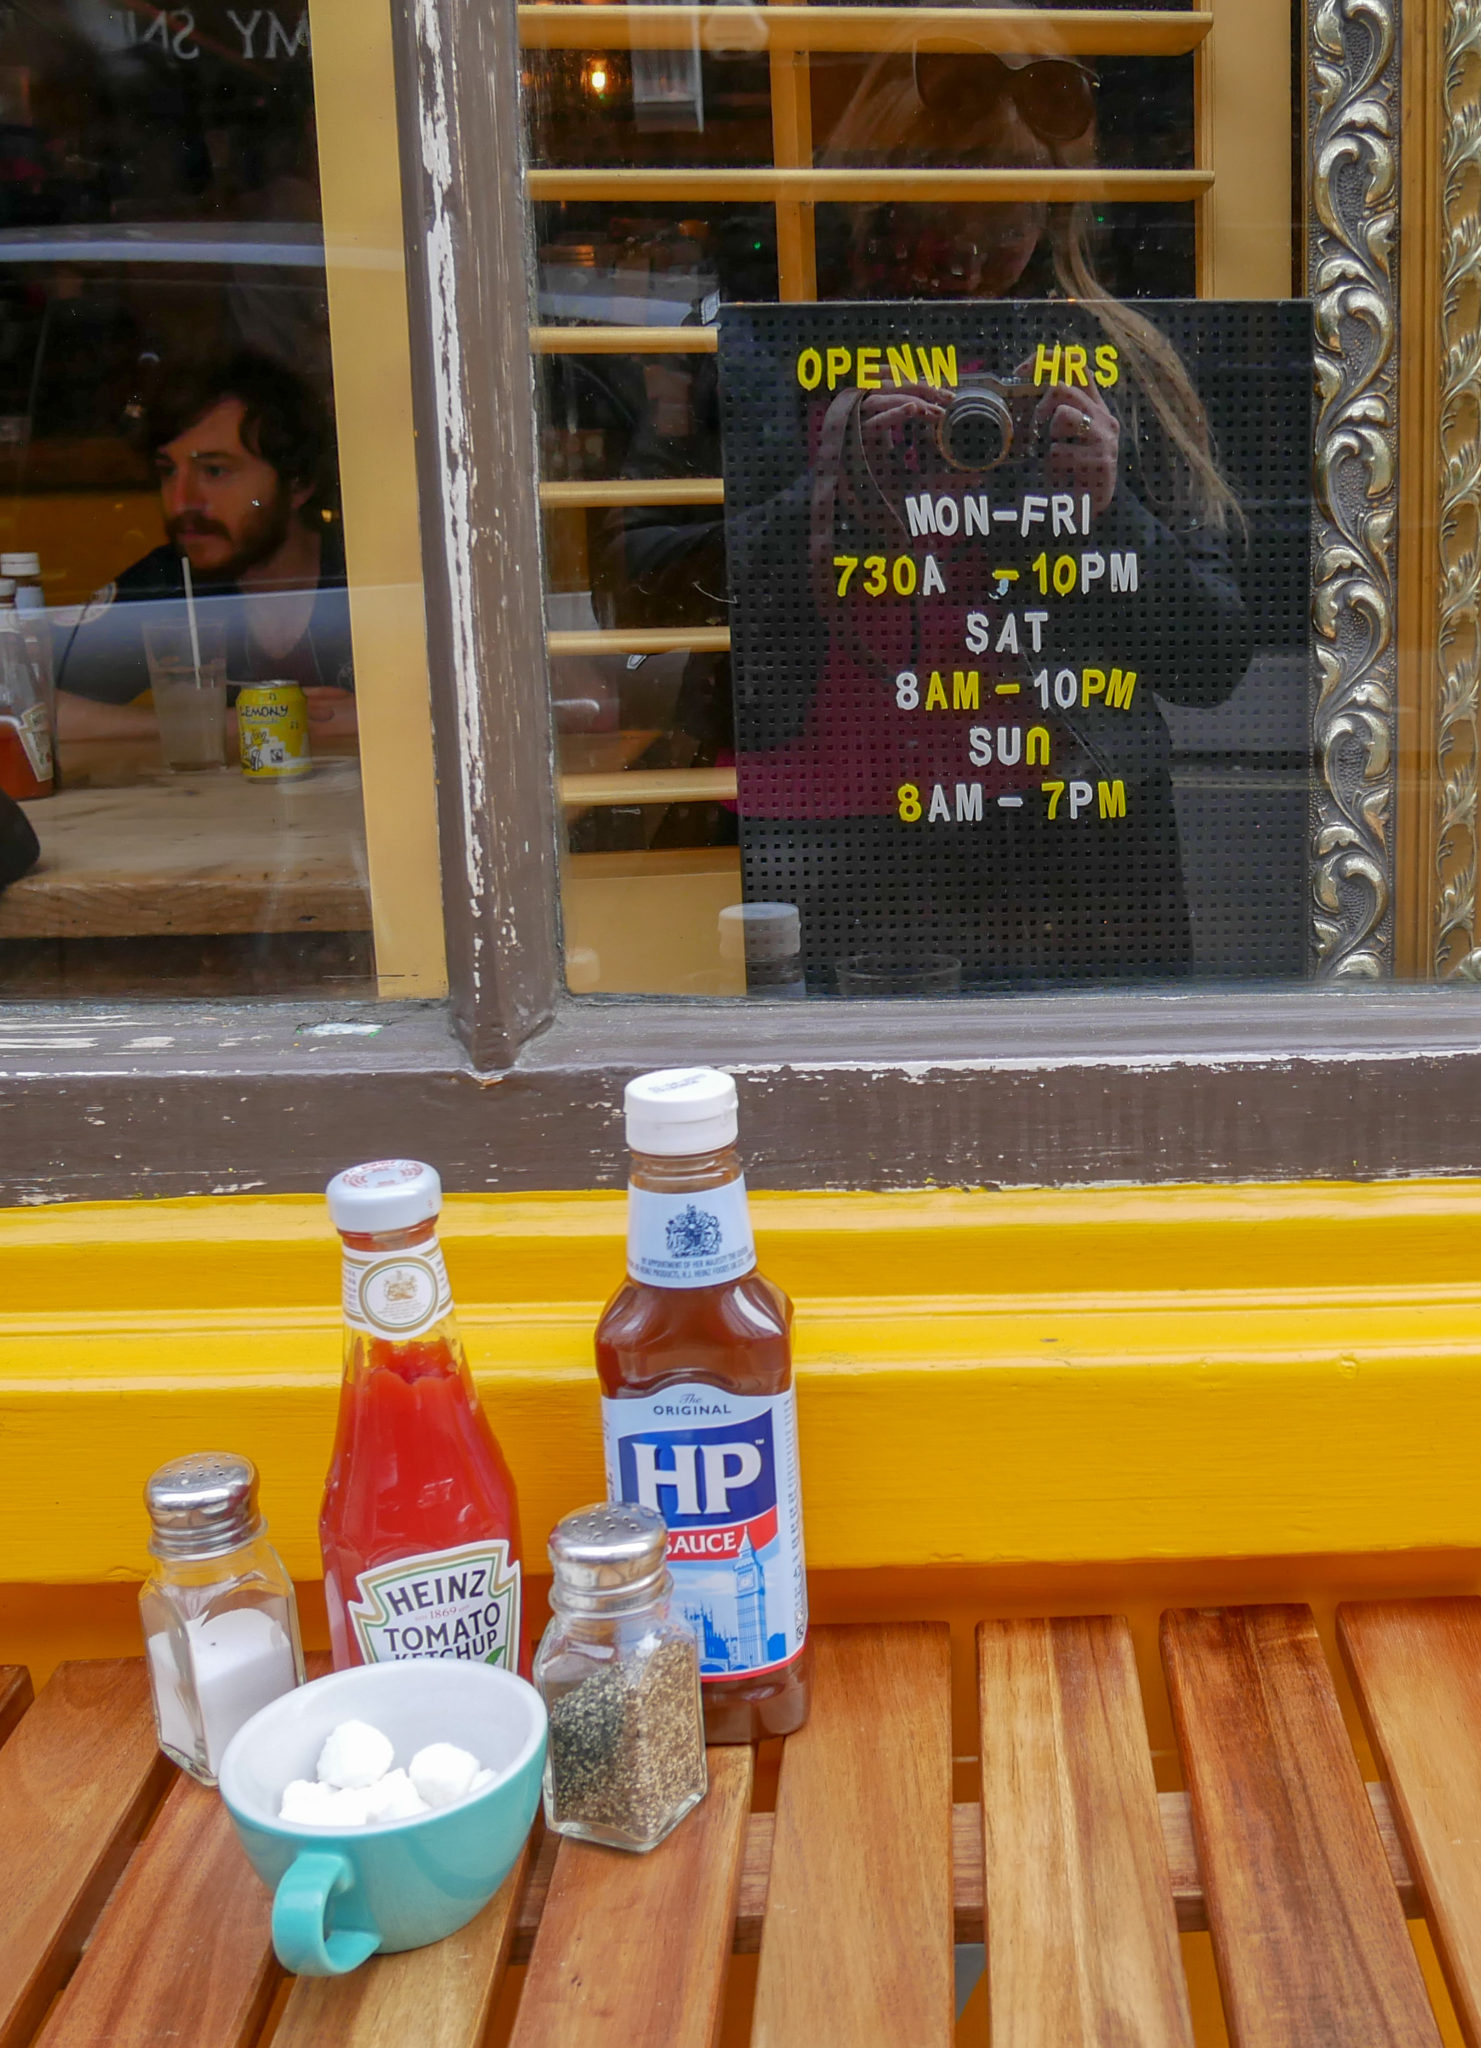 A wooden table with sauces, salt, pepper and cup of sugar cubes in front of an opening hours sign at The Breakfast Club, Soho, London